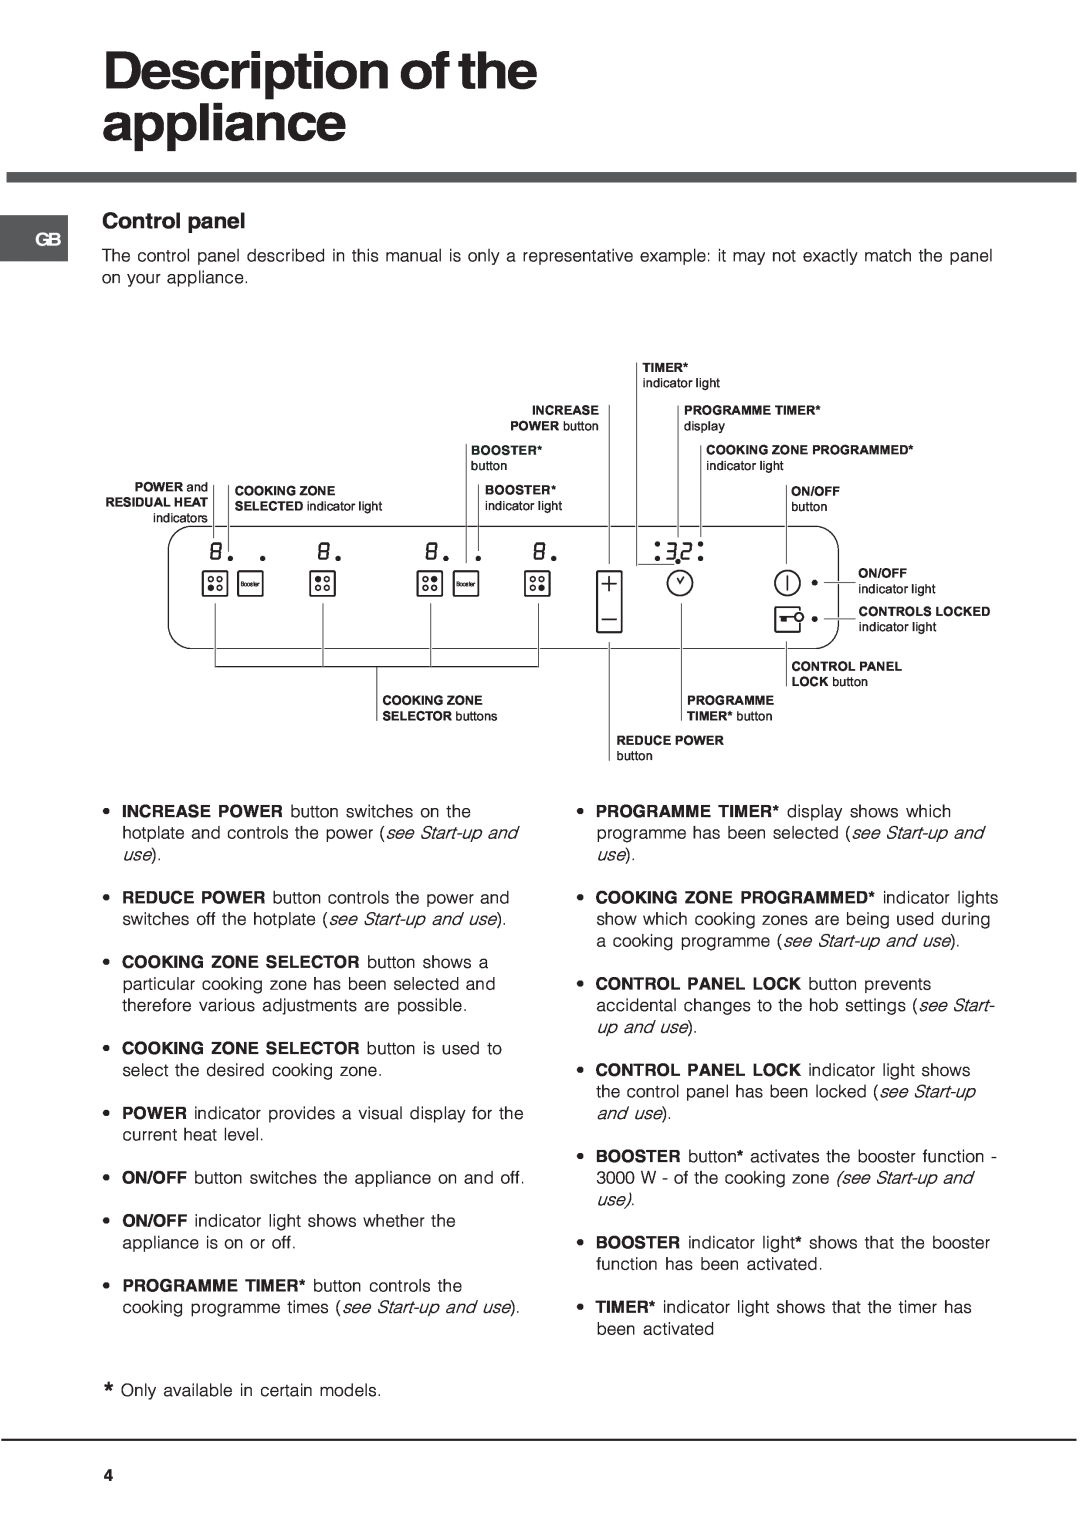 Hotpoint CIC 642 C manual Description of the appliance, Control panel 